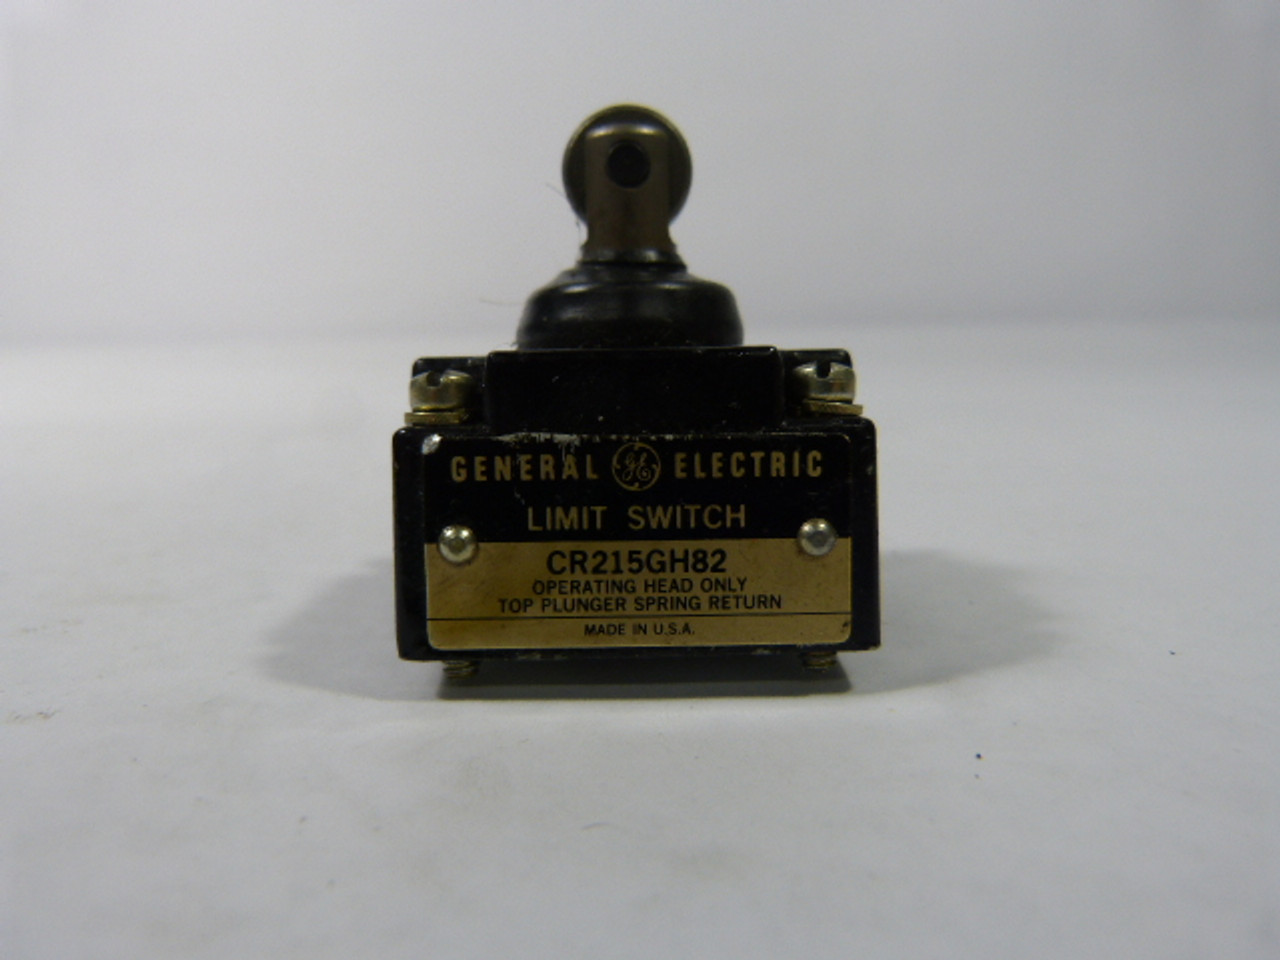 General Electric CR215GH82 Limit Switch Operating Head Only USED